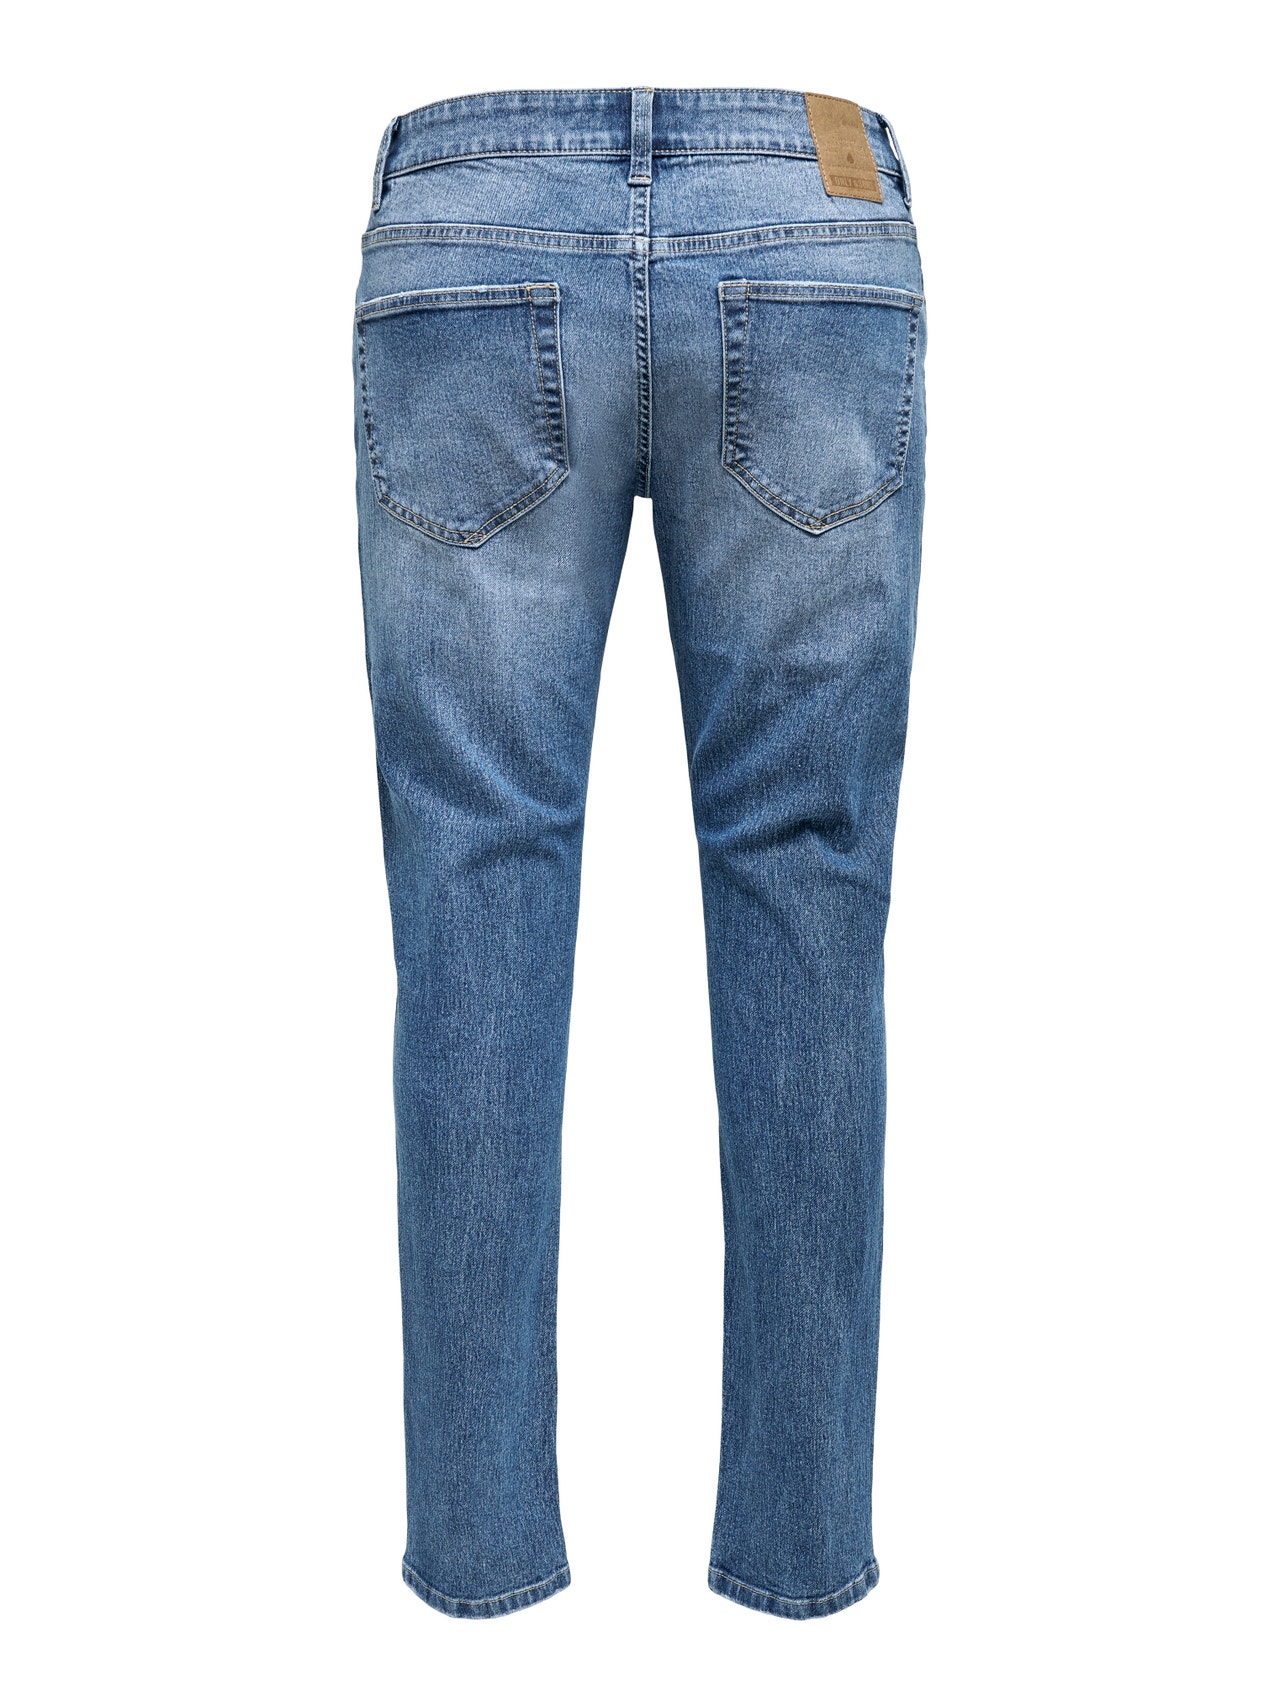 ONLY & SONS Slim Fit Mittlere Taille Jeans -Blue Denim - 22019940